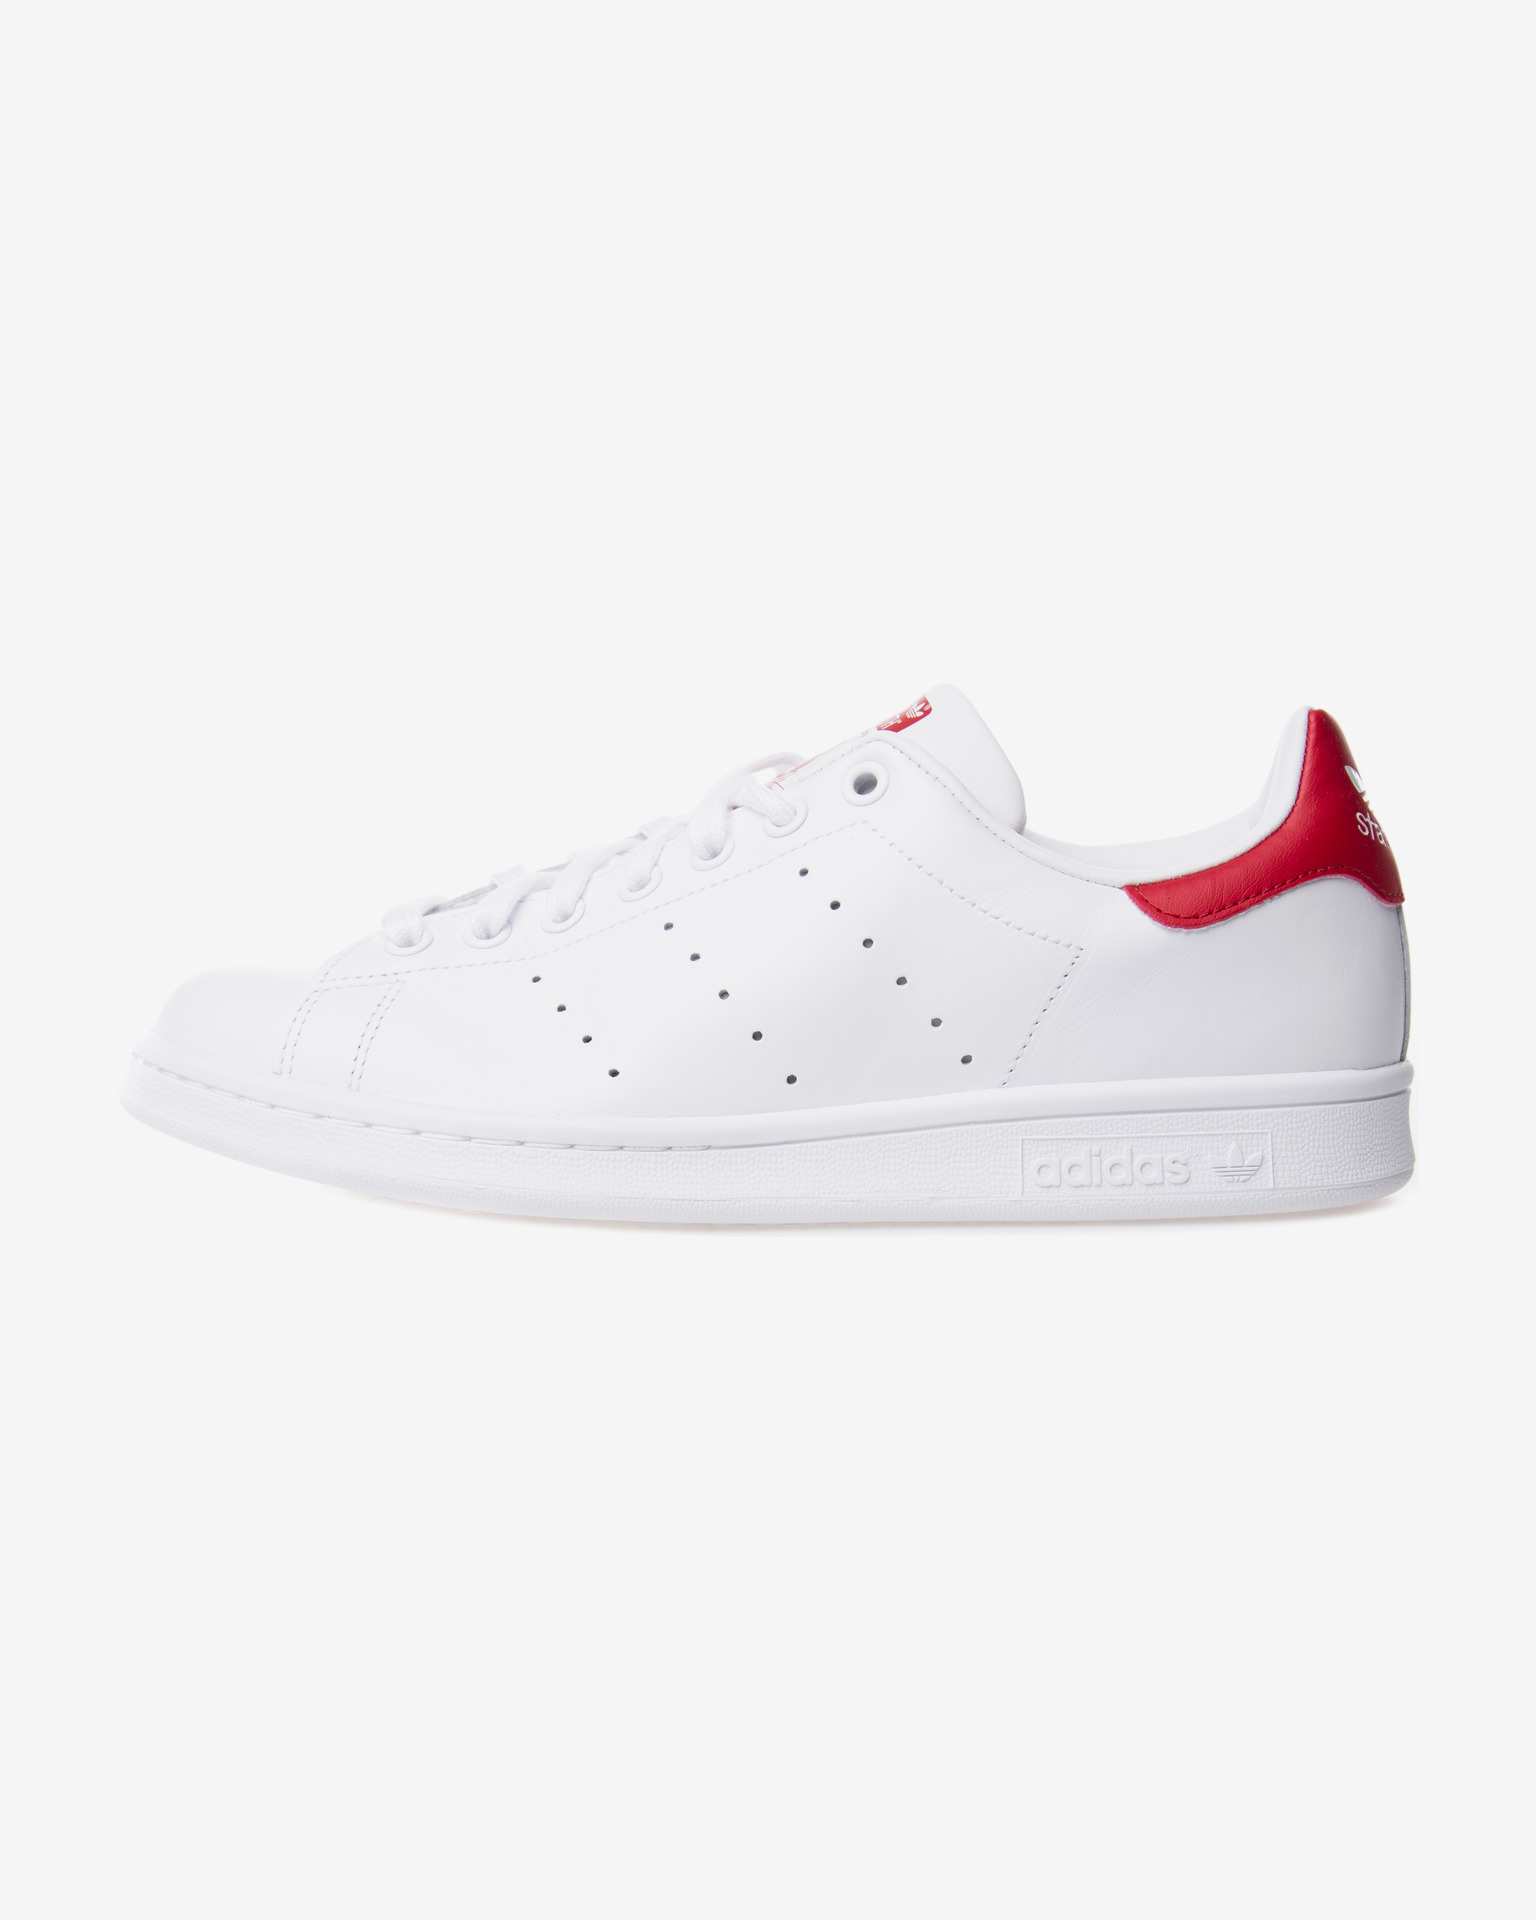 ADIDAS ORIGINALS Stan Smith Lux leather sneakers | NET-A-PORTER